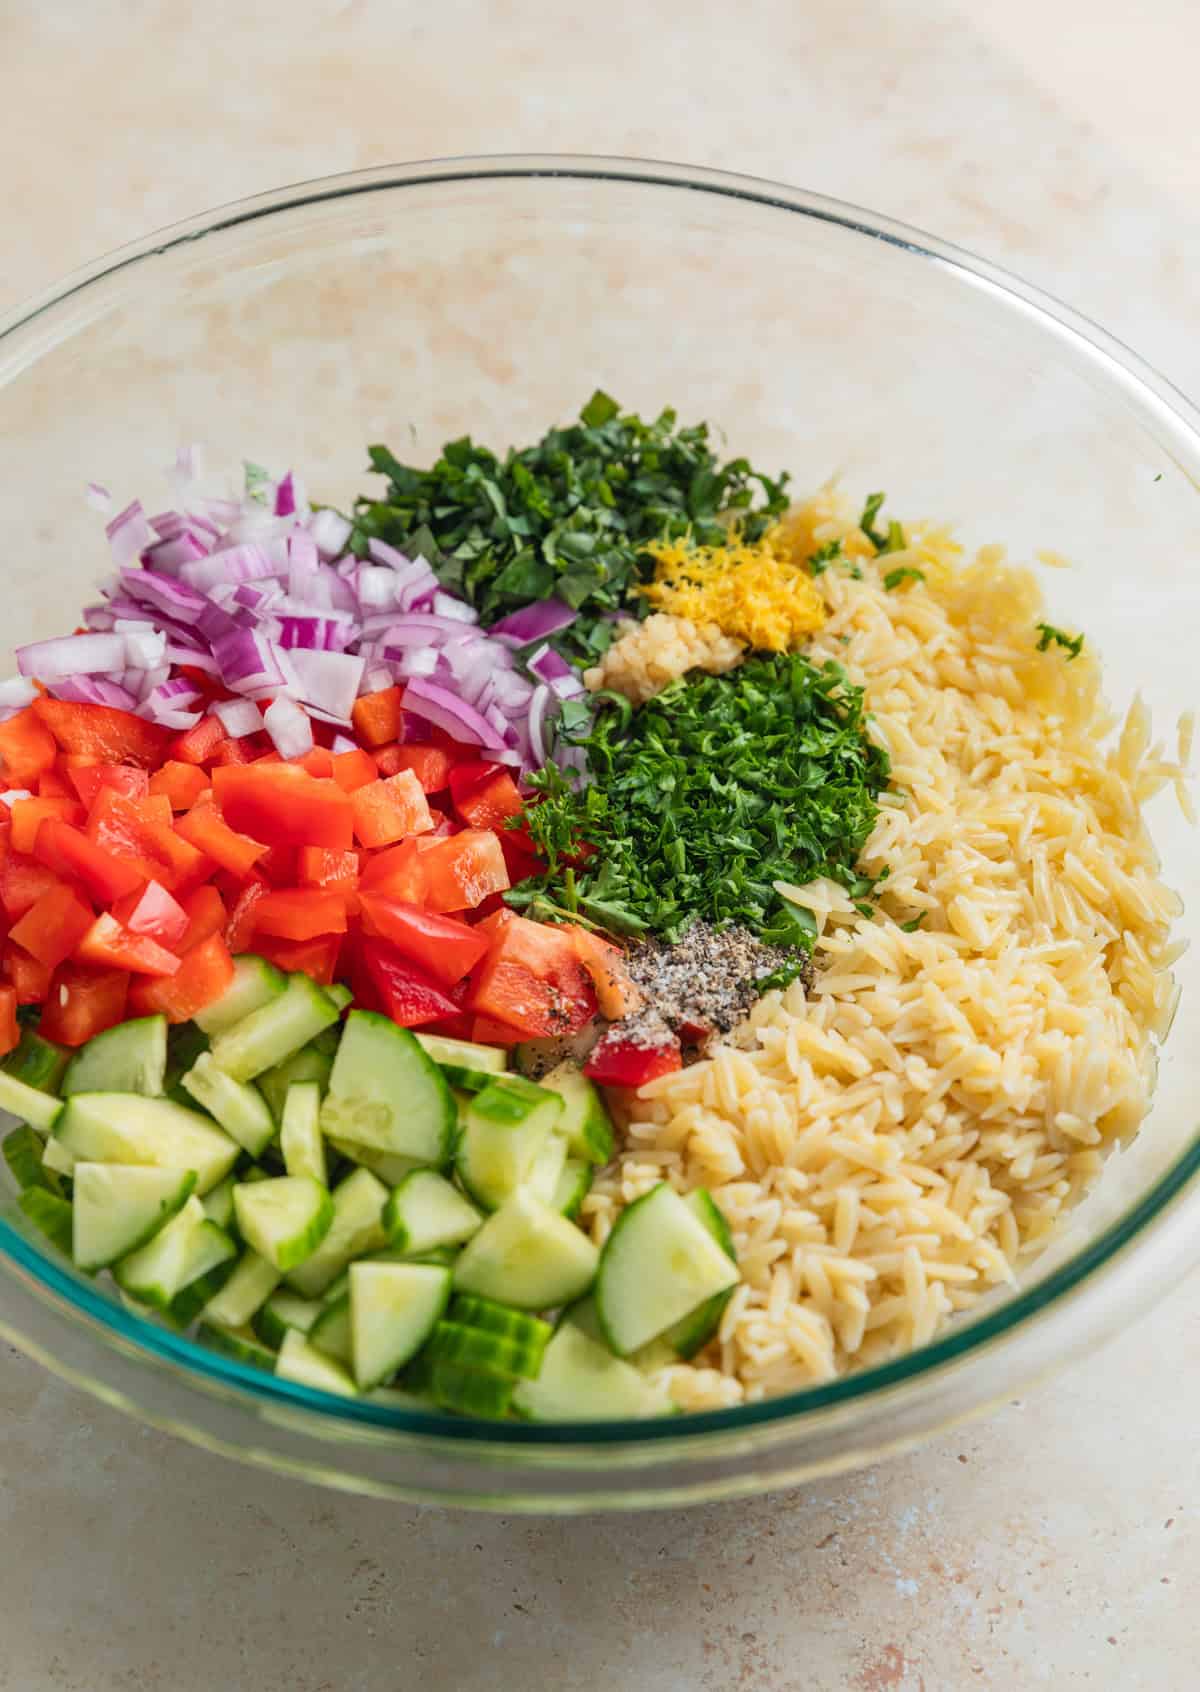 Orzo, lemon zest, cucumber, peppers and other ingredients in glass mixing bowl.